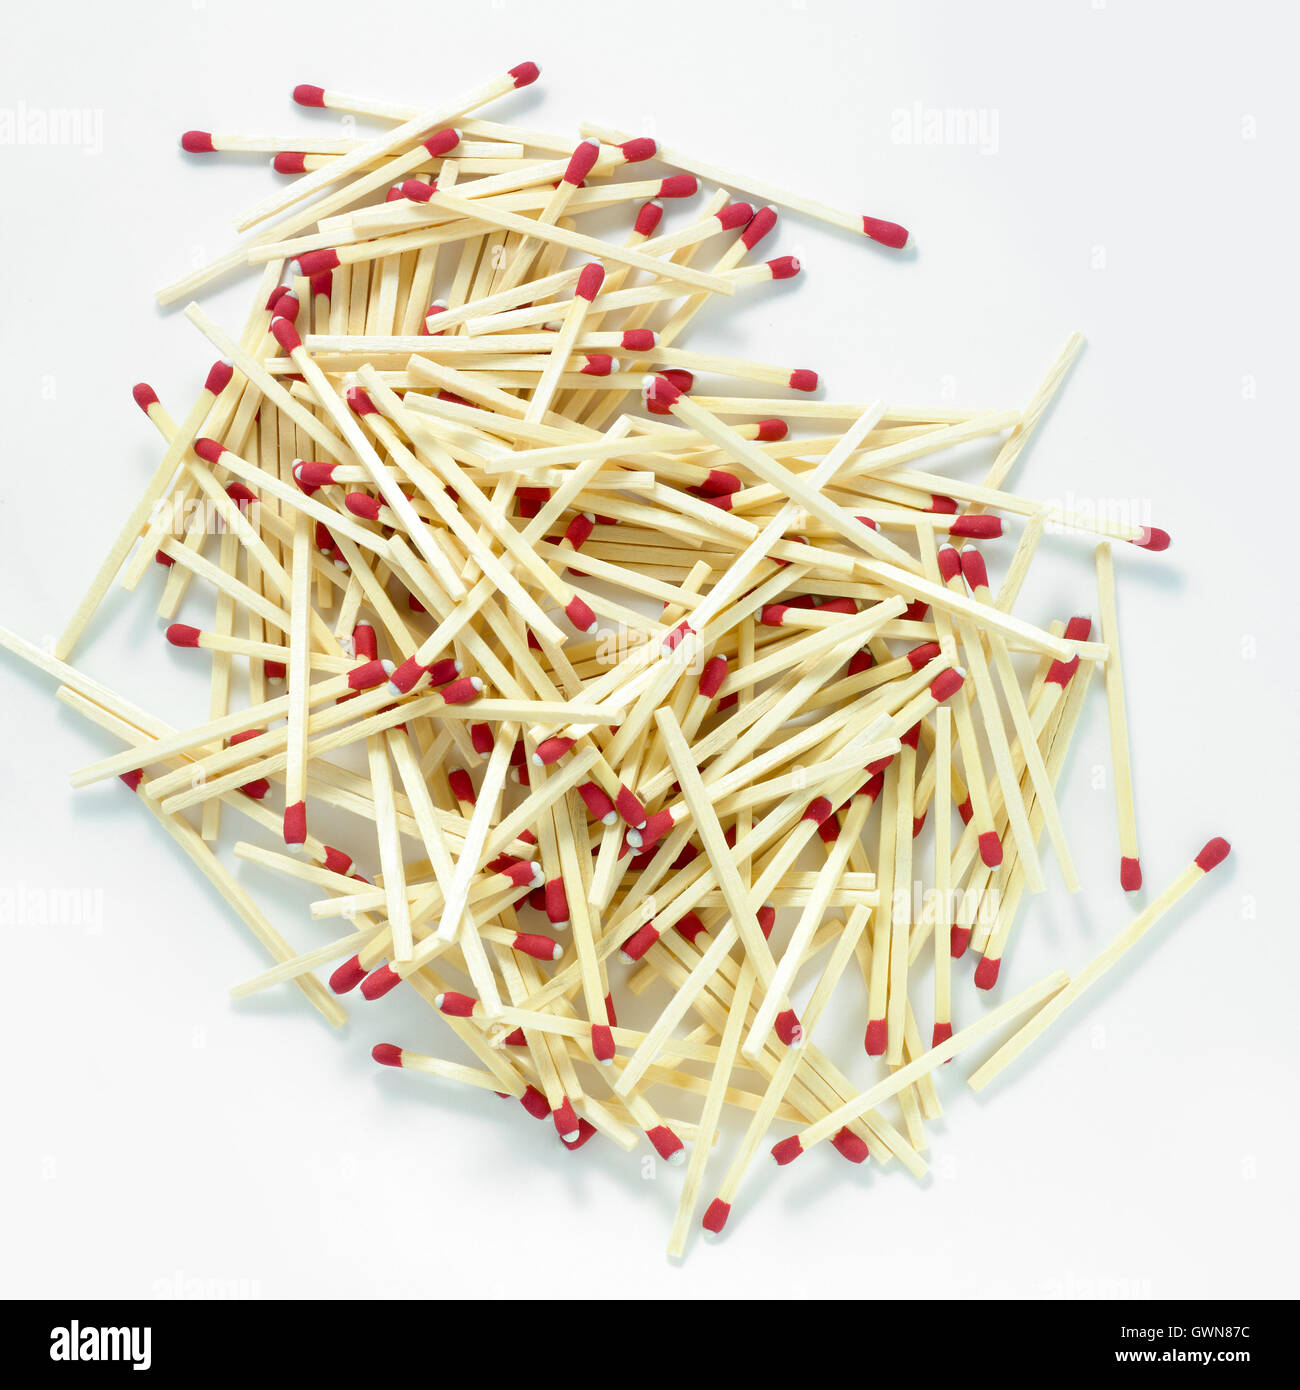 stack of matches isolated on a white background Stock Photo